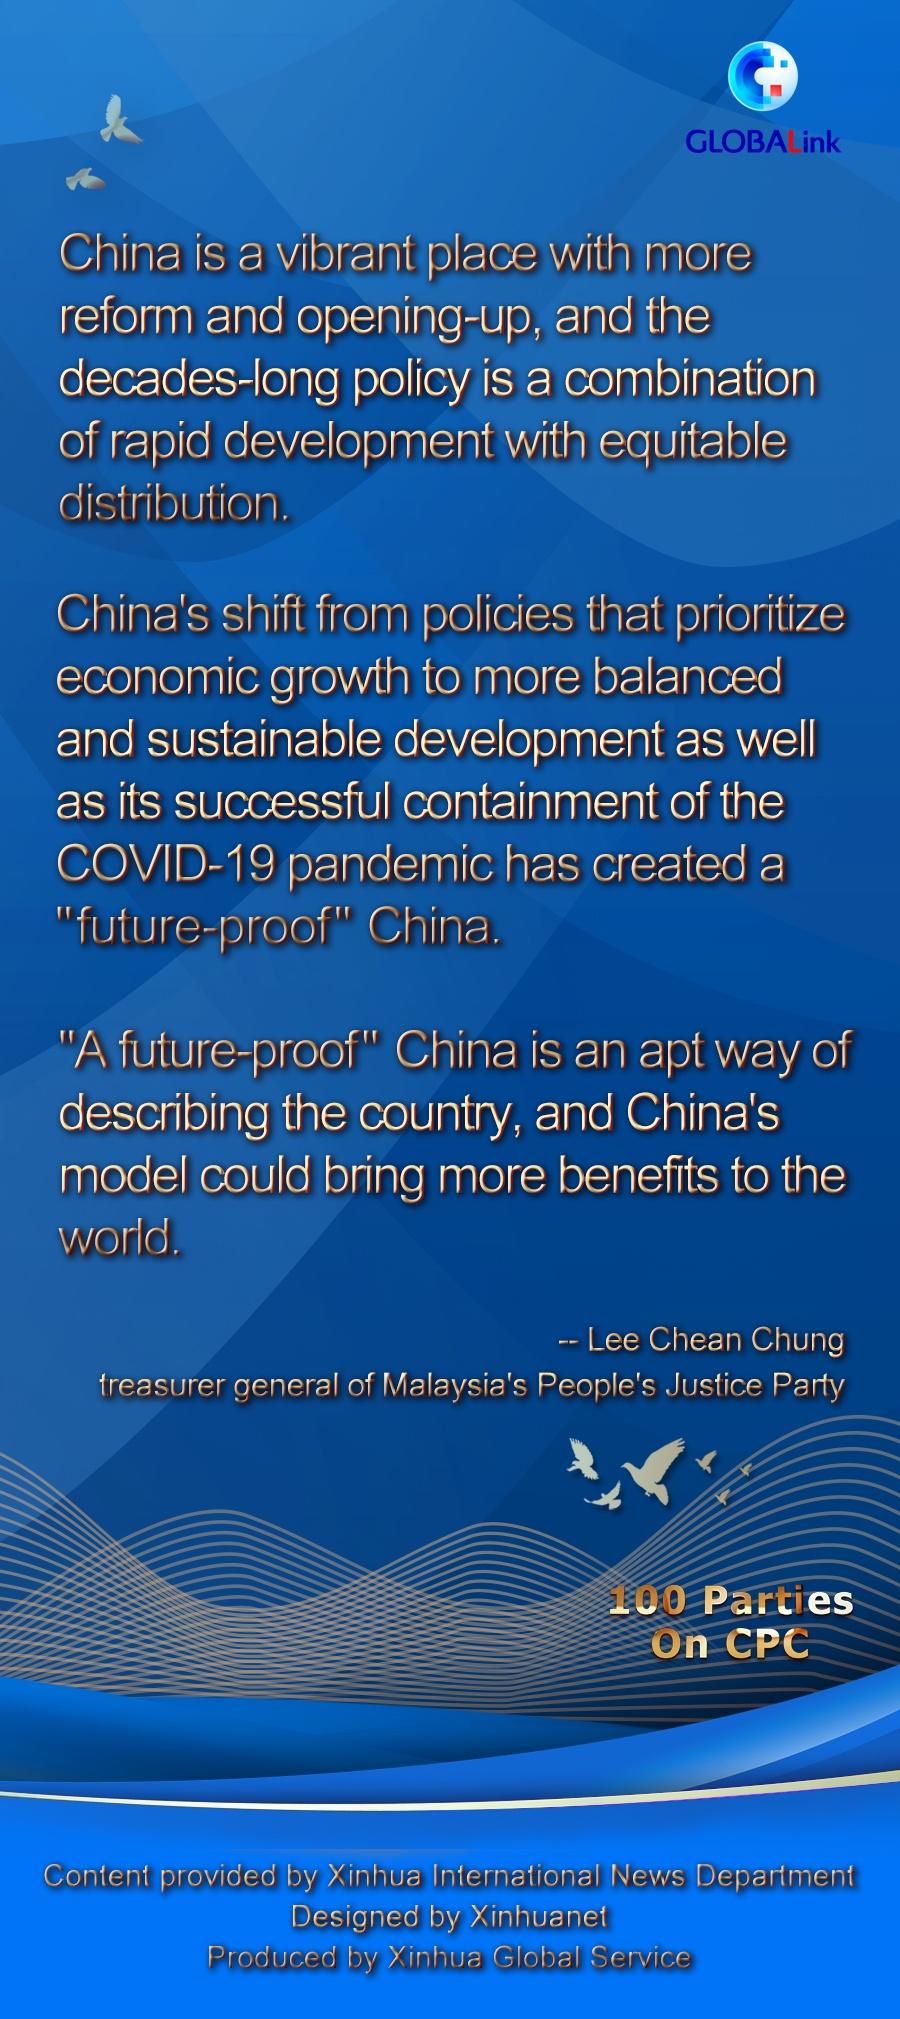 Interview: CPC leadership has created "future-proof" China, says Malaysian politician